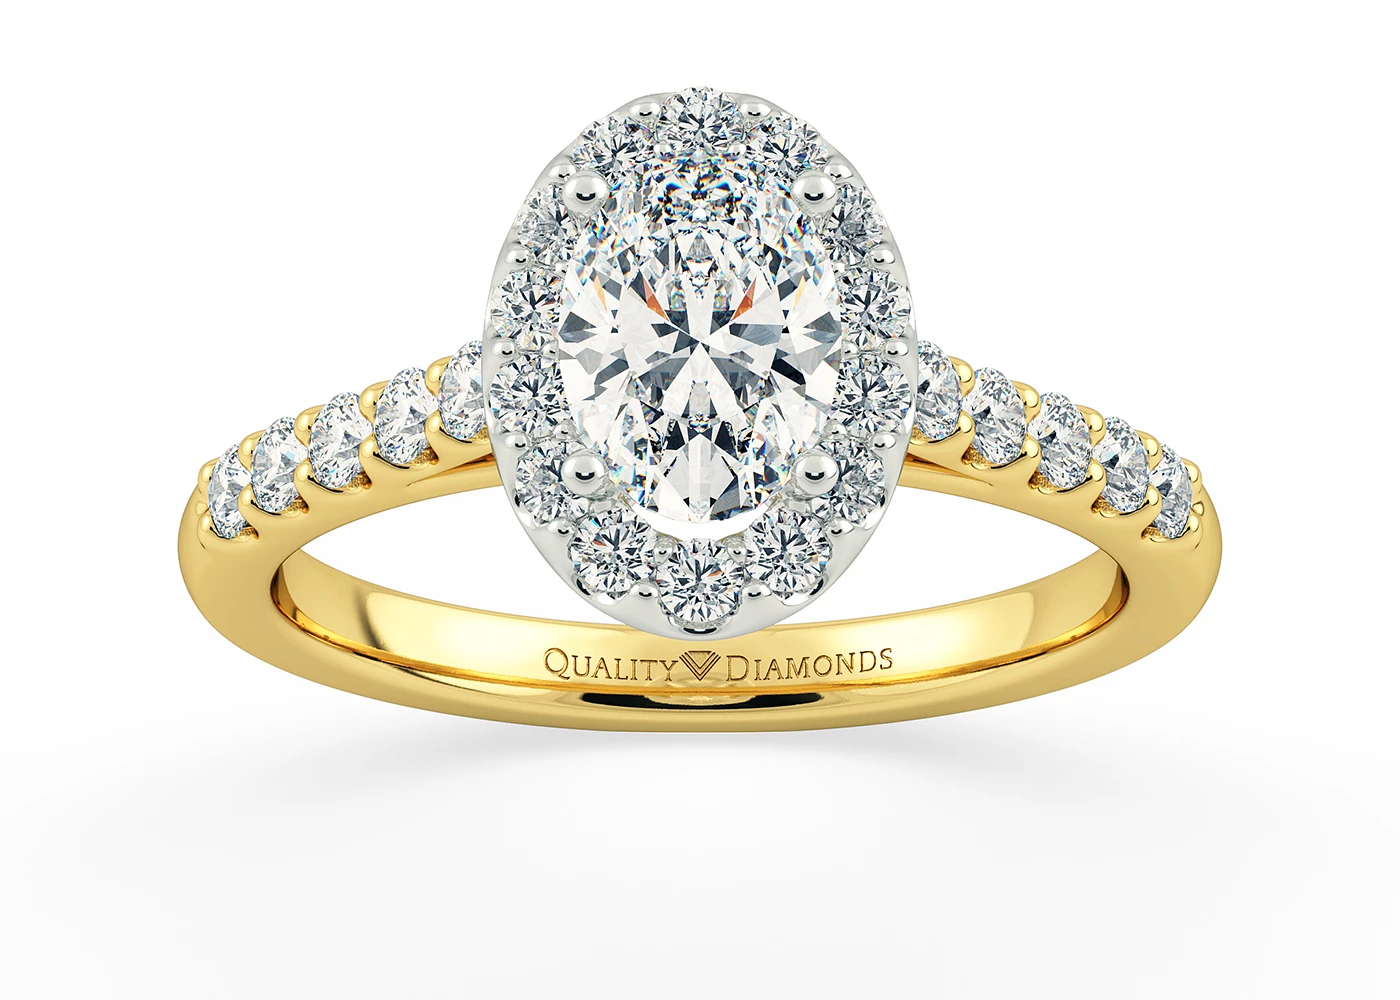 Two Carat Halo Oval Diamond Ring in 18K Yellow Gold